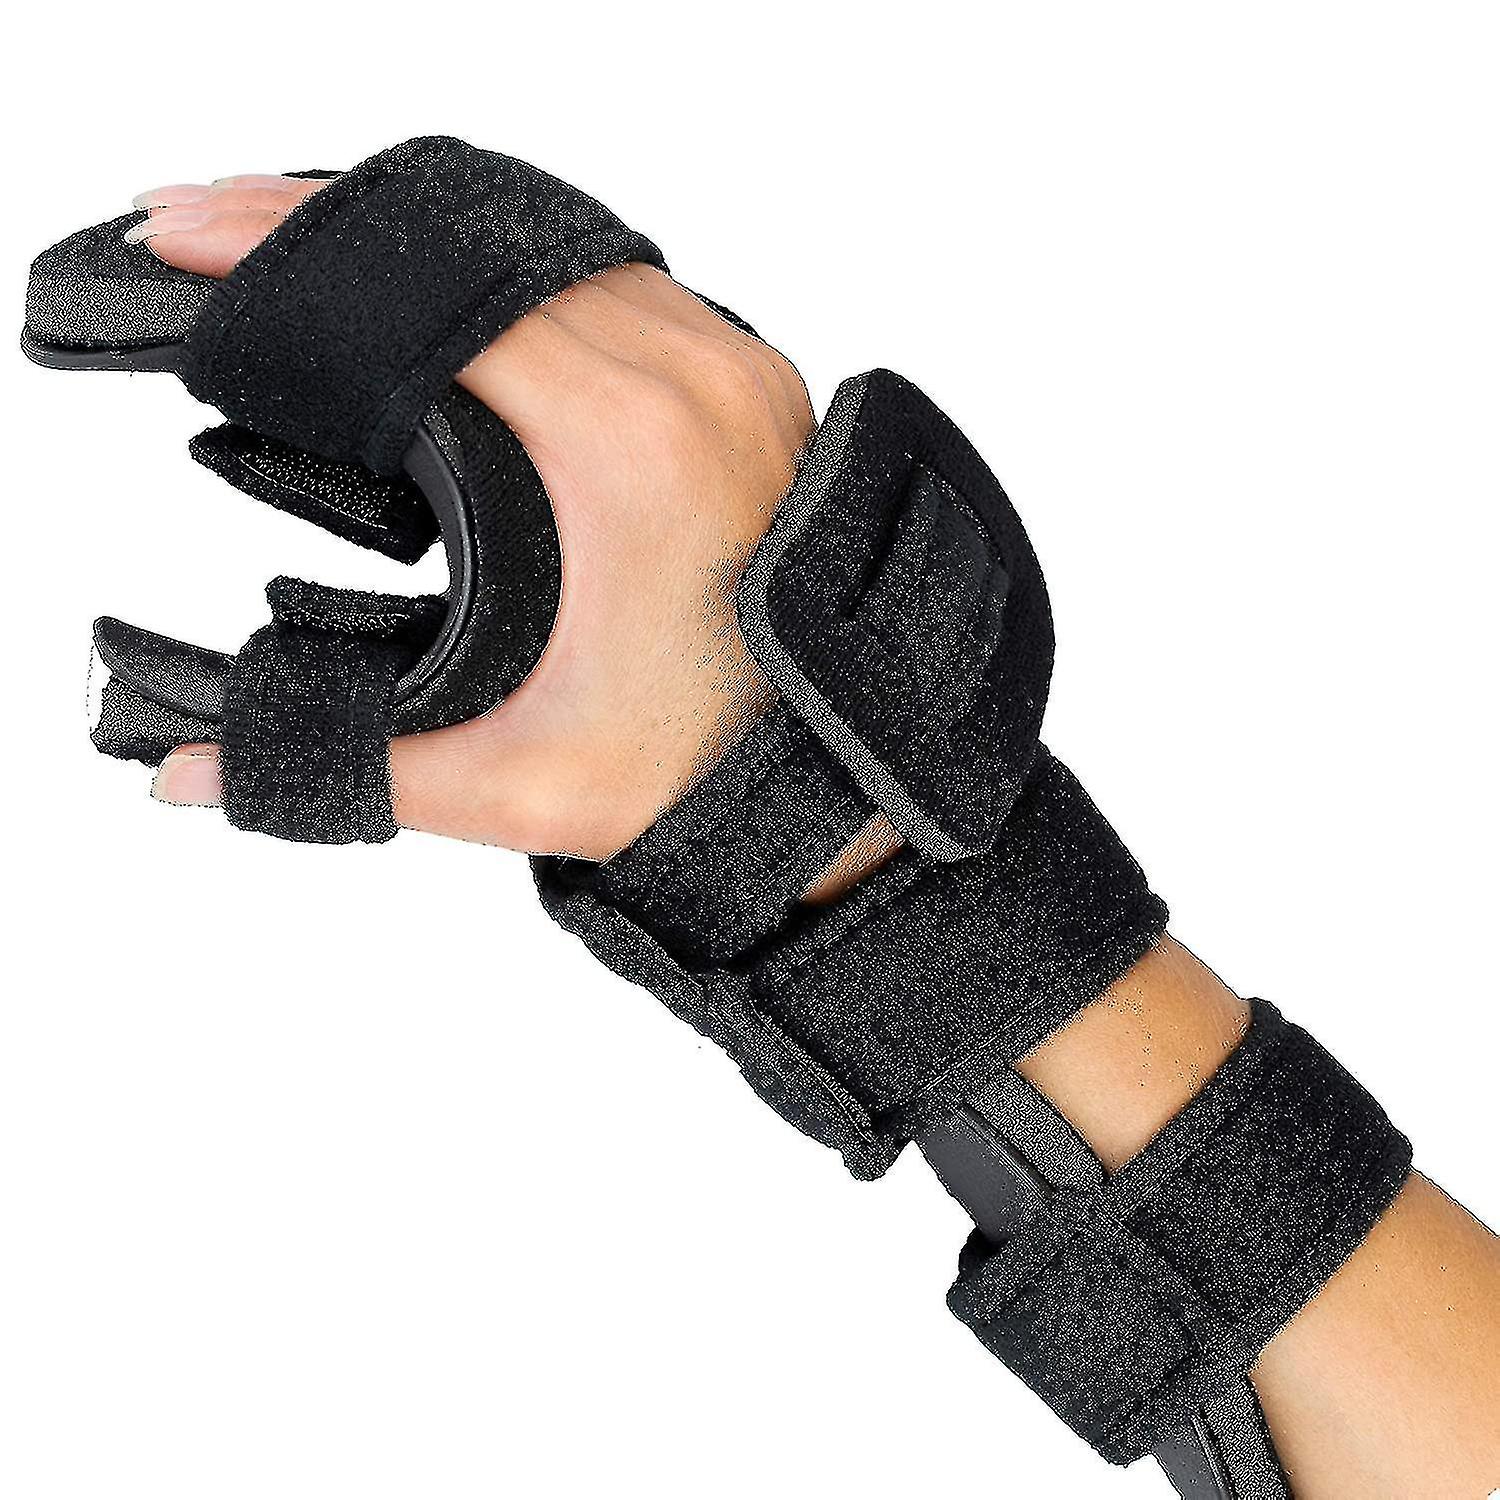 <p>- immobilizes to reduce symptoms during wrist movements like radial and ulnar deviation</p><p>- retard further deformity</p>